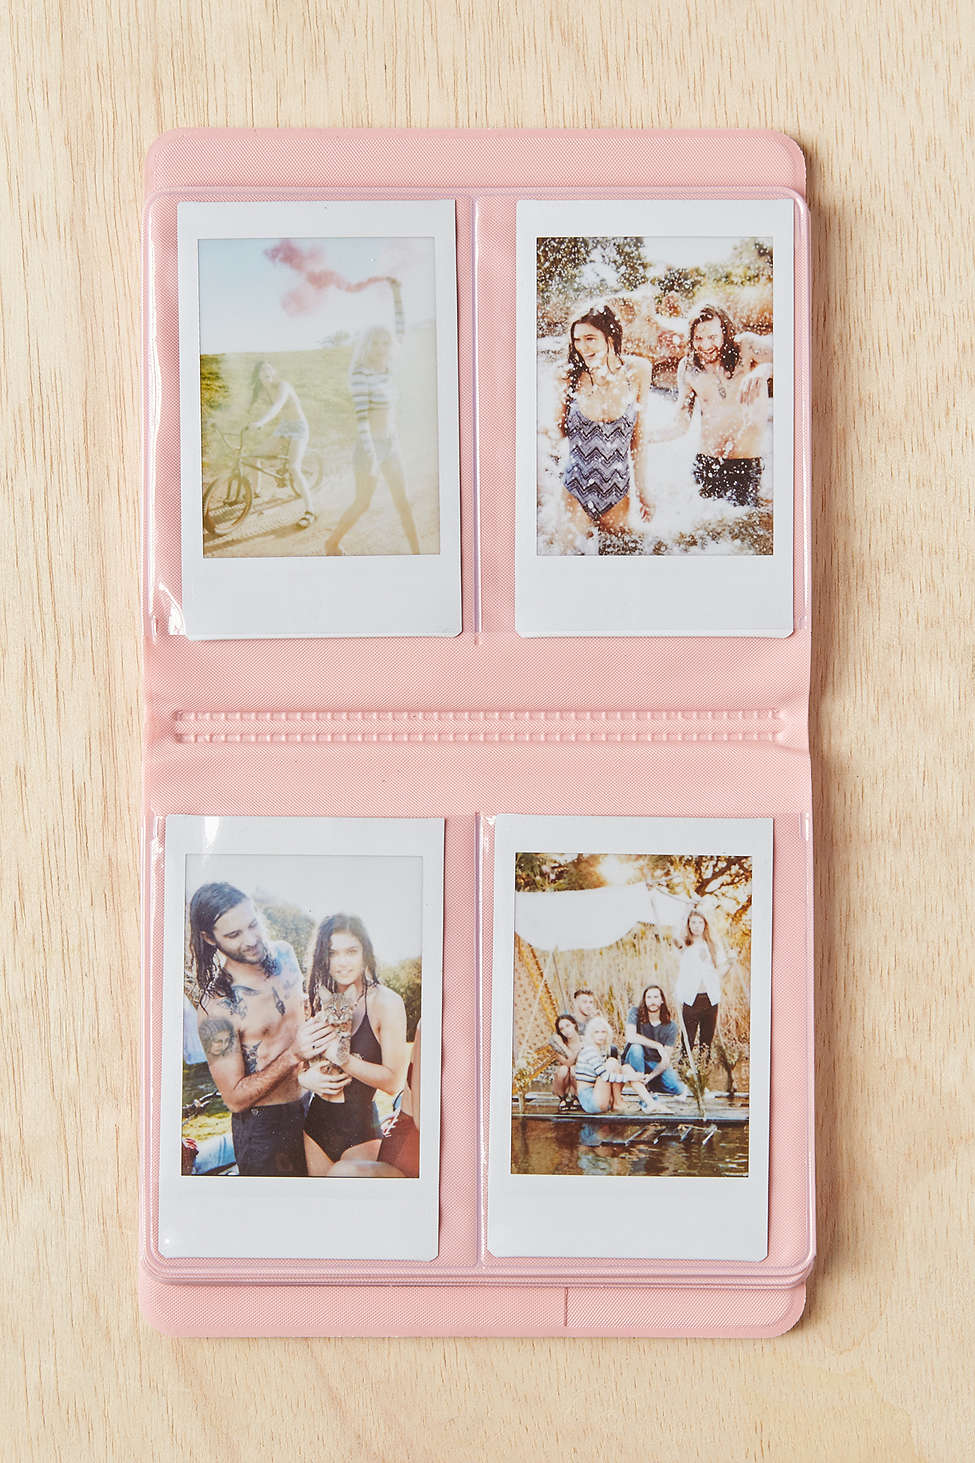 An Instax Photo Album from Urban Outfitters used for photograph storage is a creative Valentine's day gift for boyfriend or girlfriend.